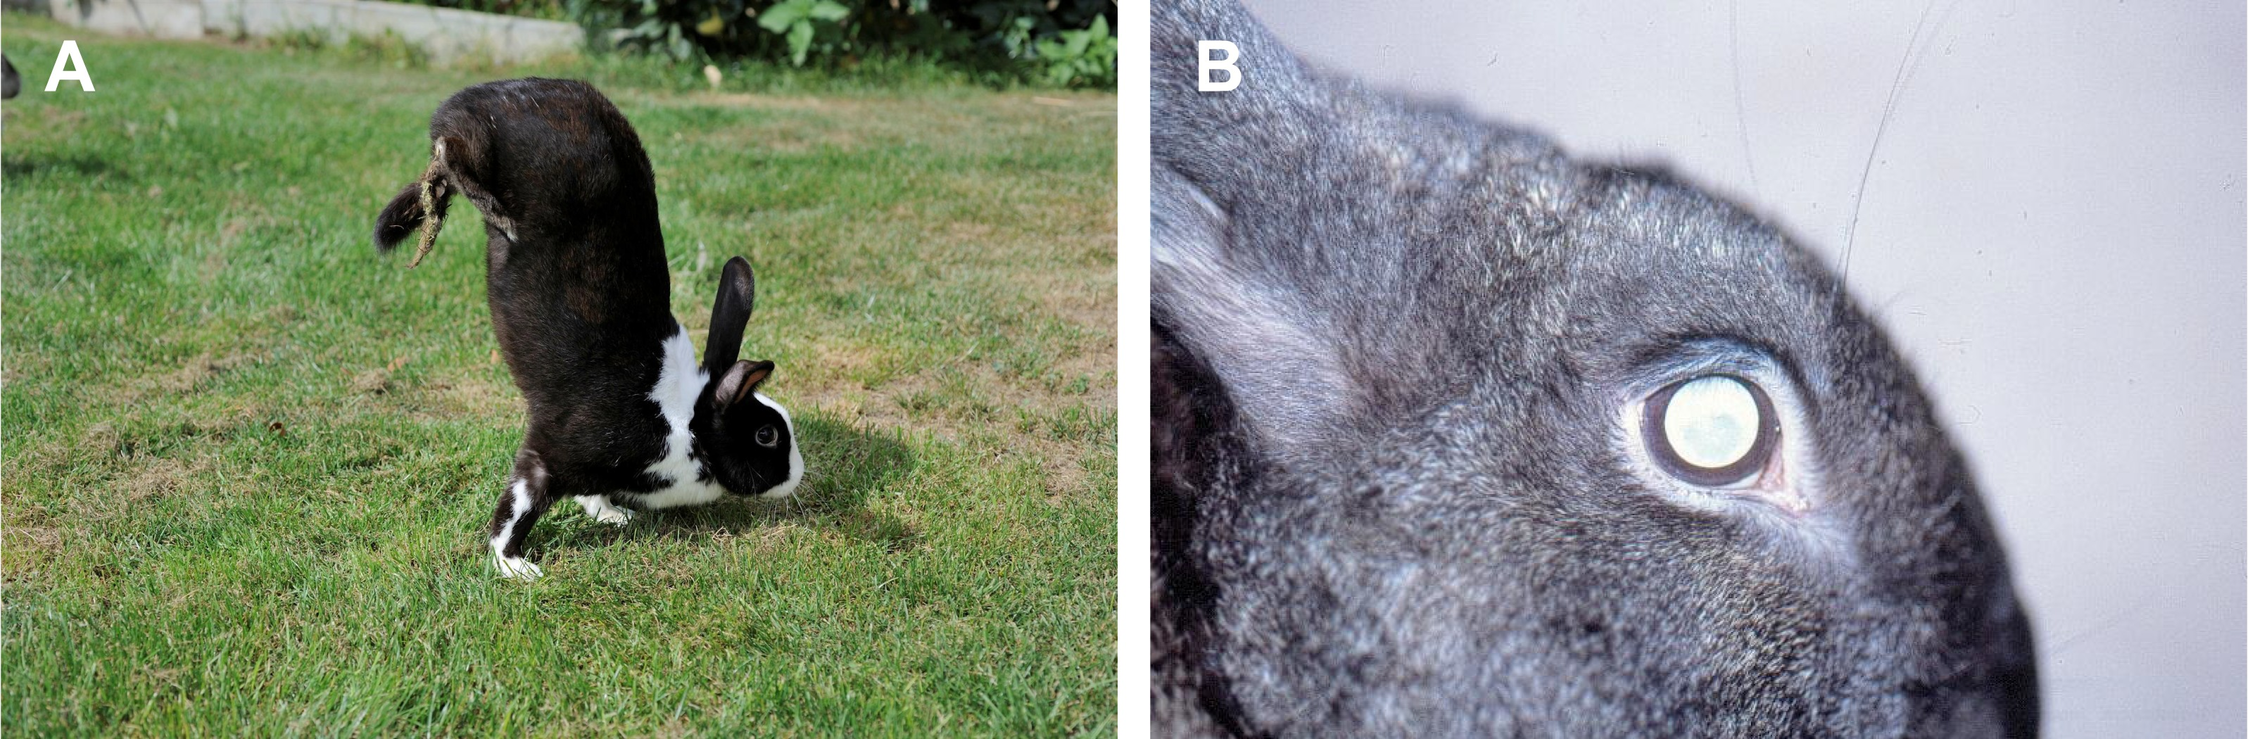 The bunnies are bipedal and often blind. (Image: Carneiro et al. 2021, Other)